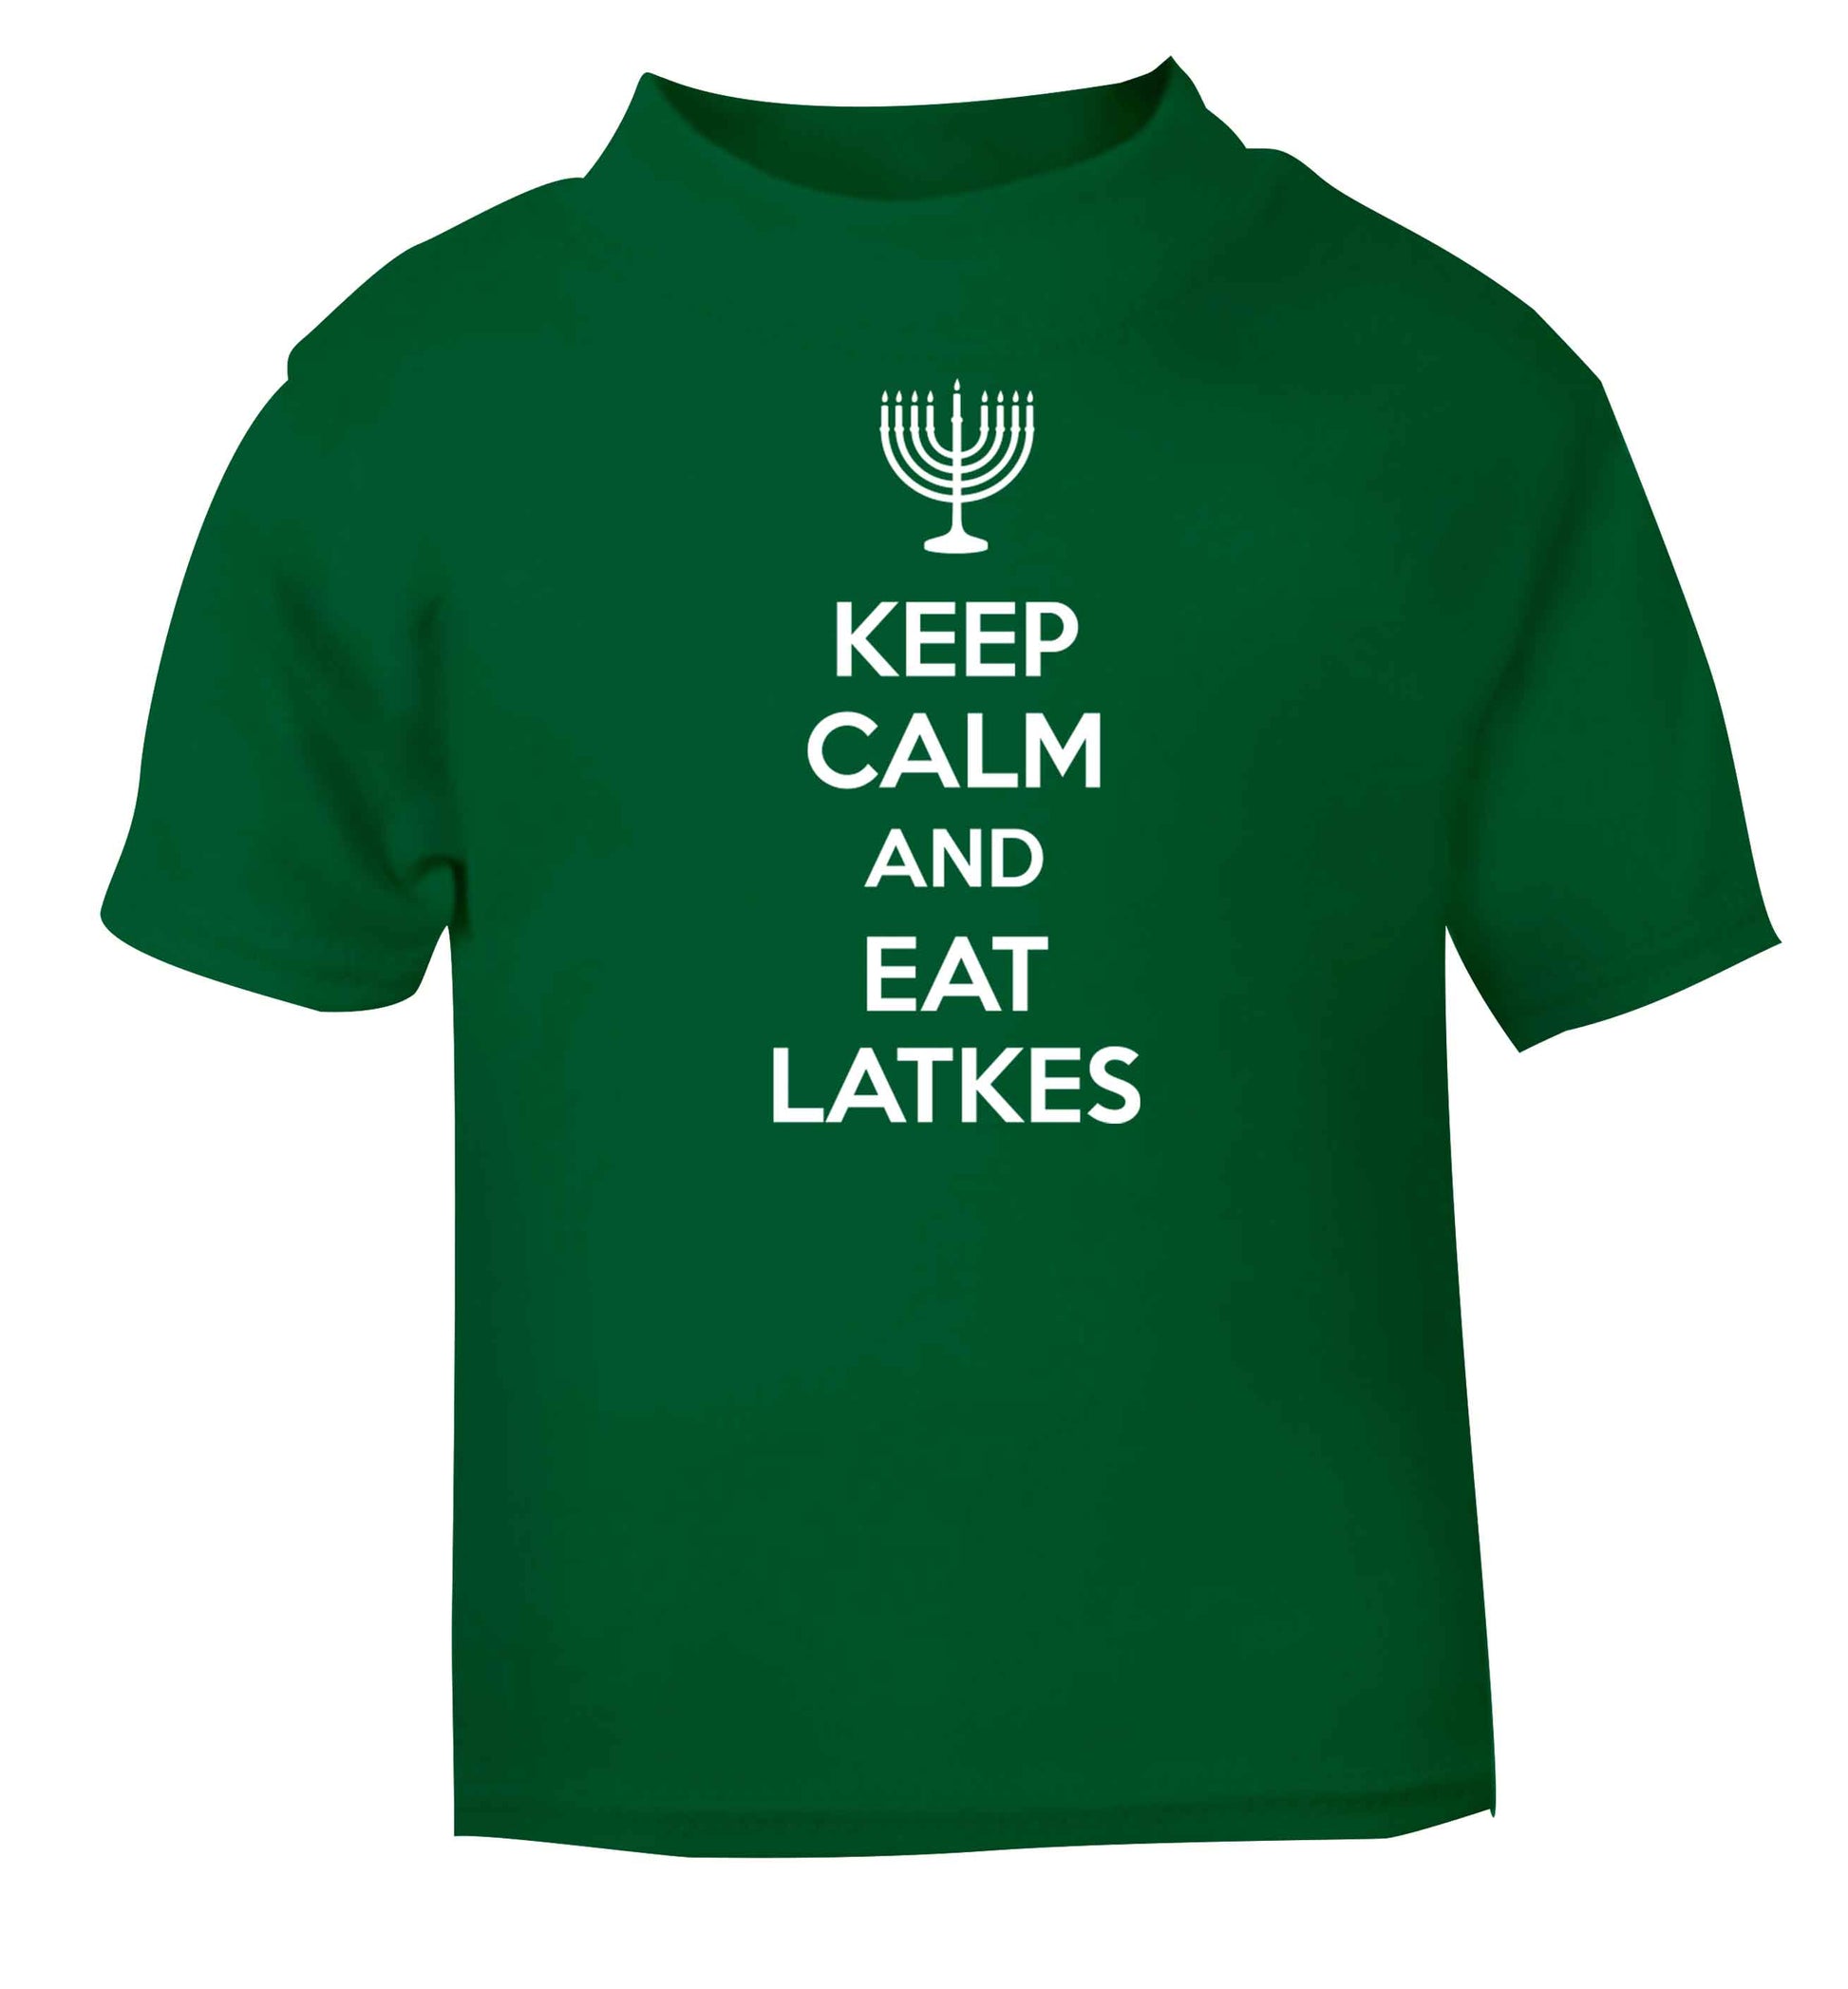 Keep calm and eat latkes green baby toddler Tshirt 2 Years